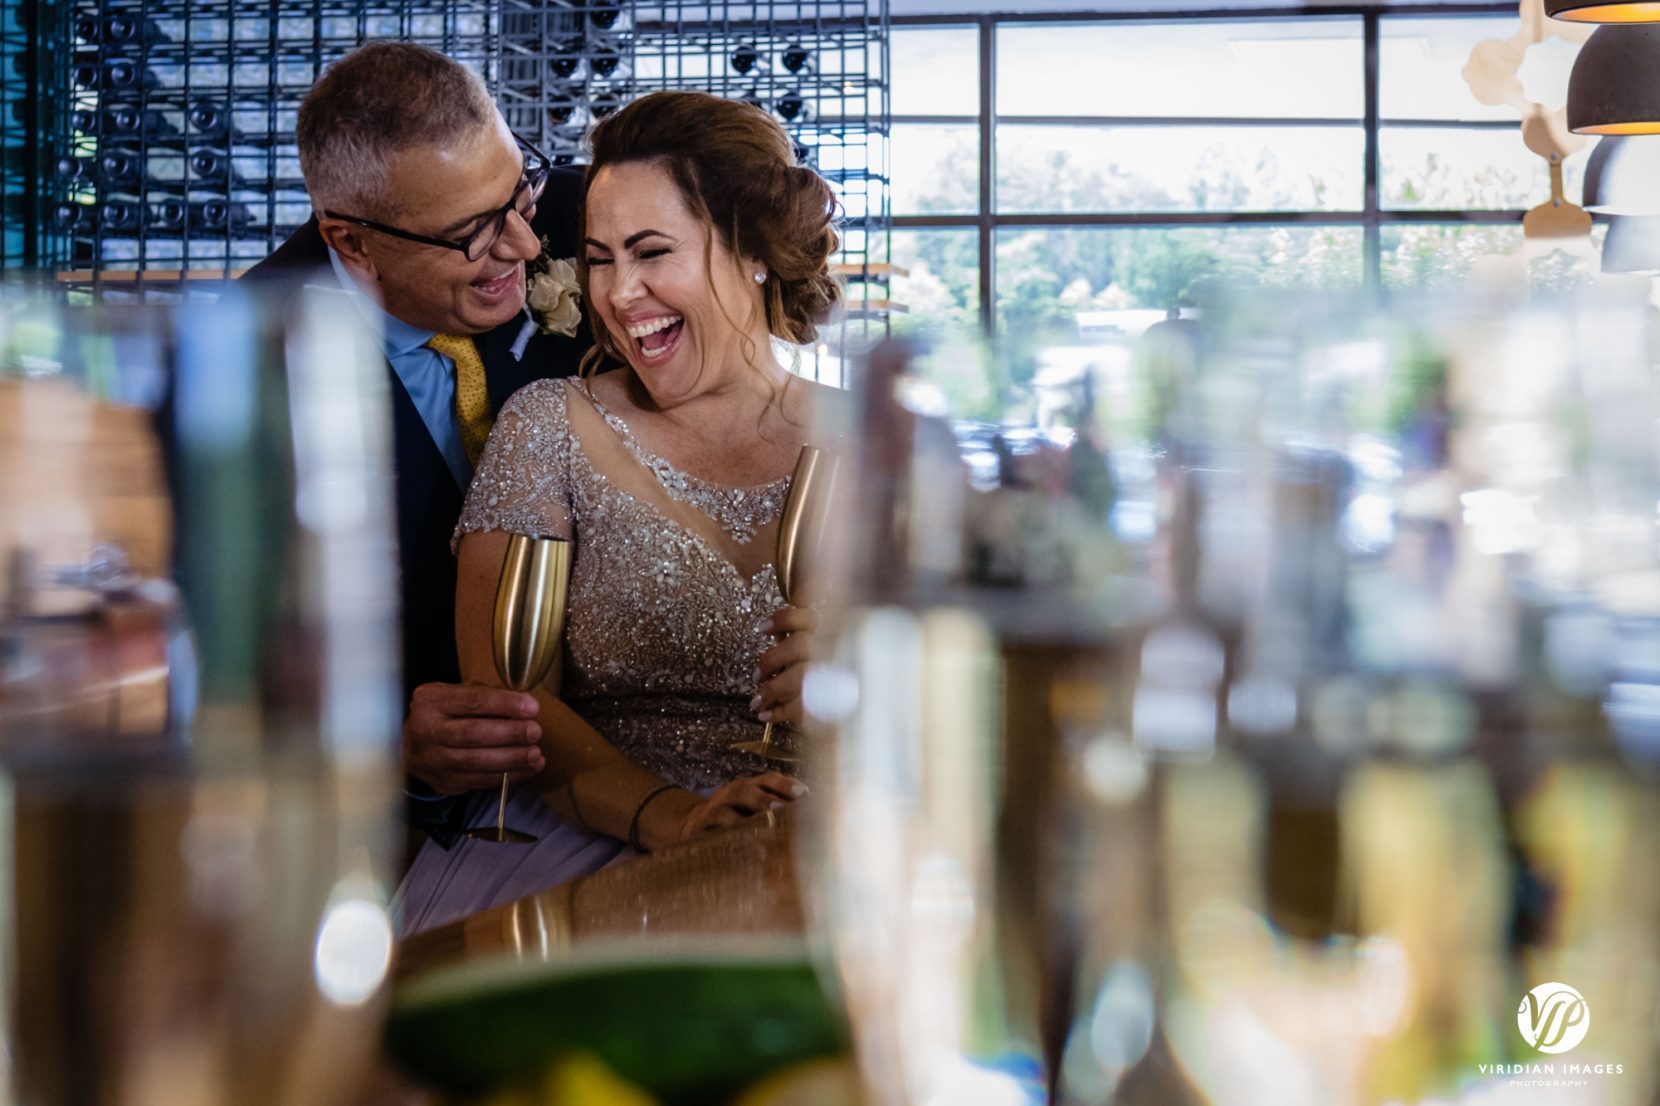 bride and groom creative portrait through wine glasses celebrating each other